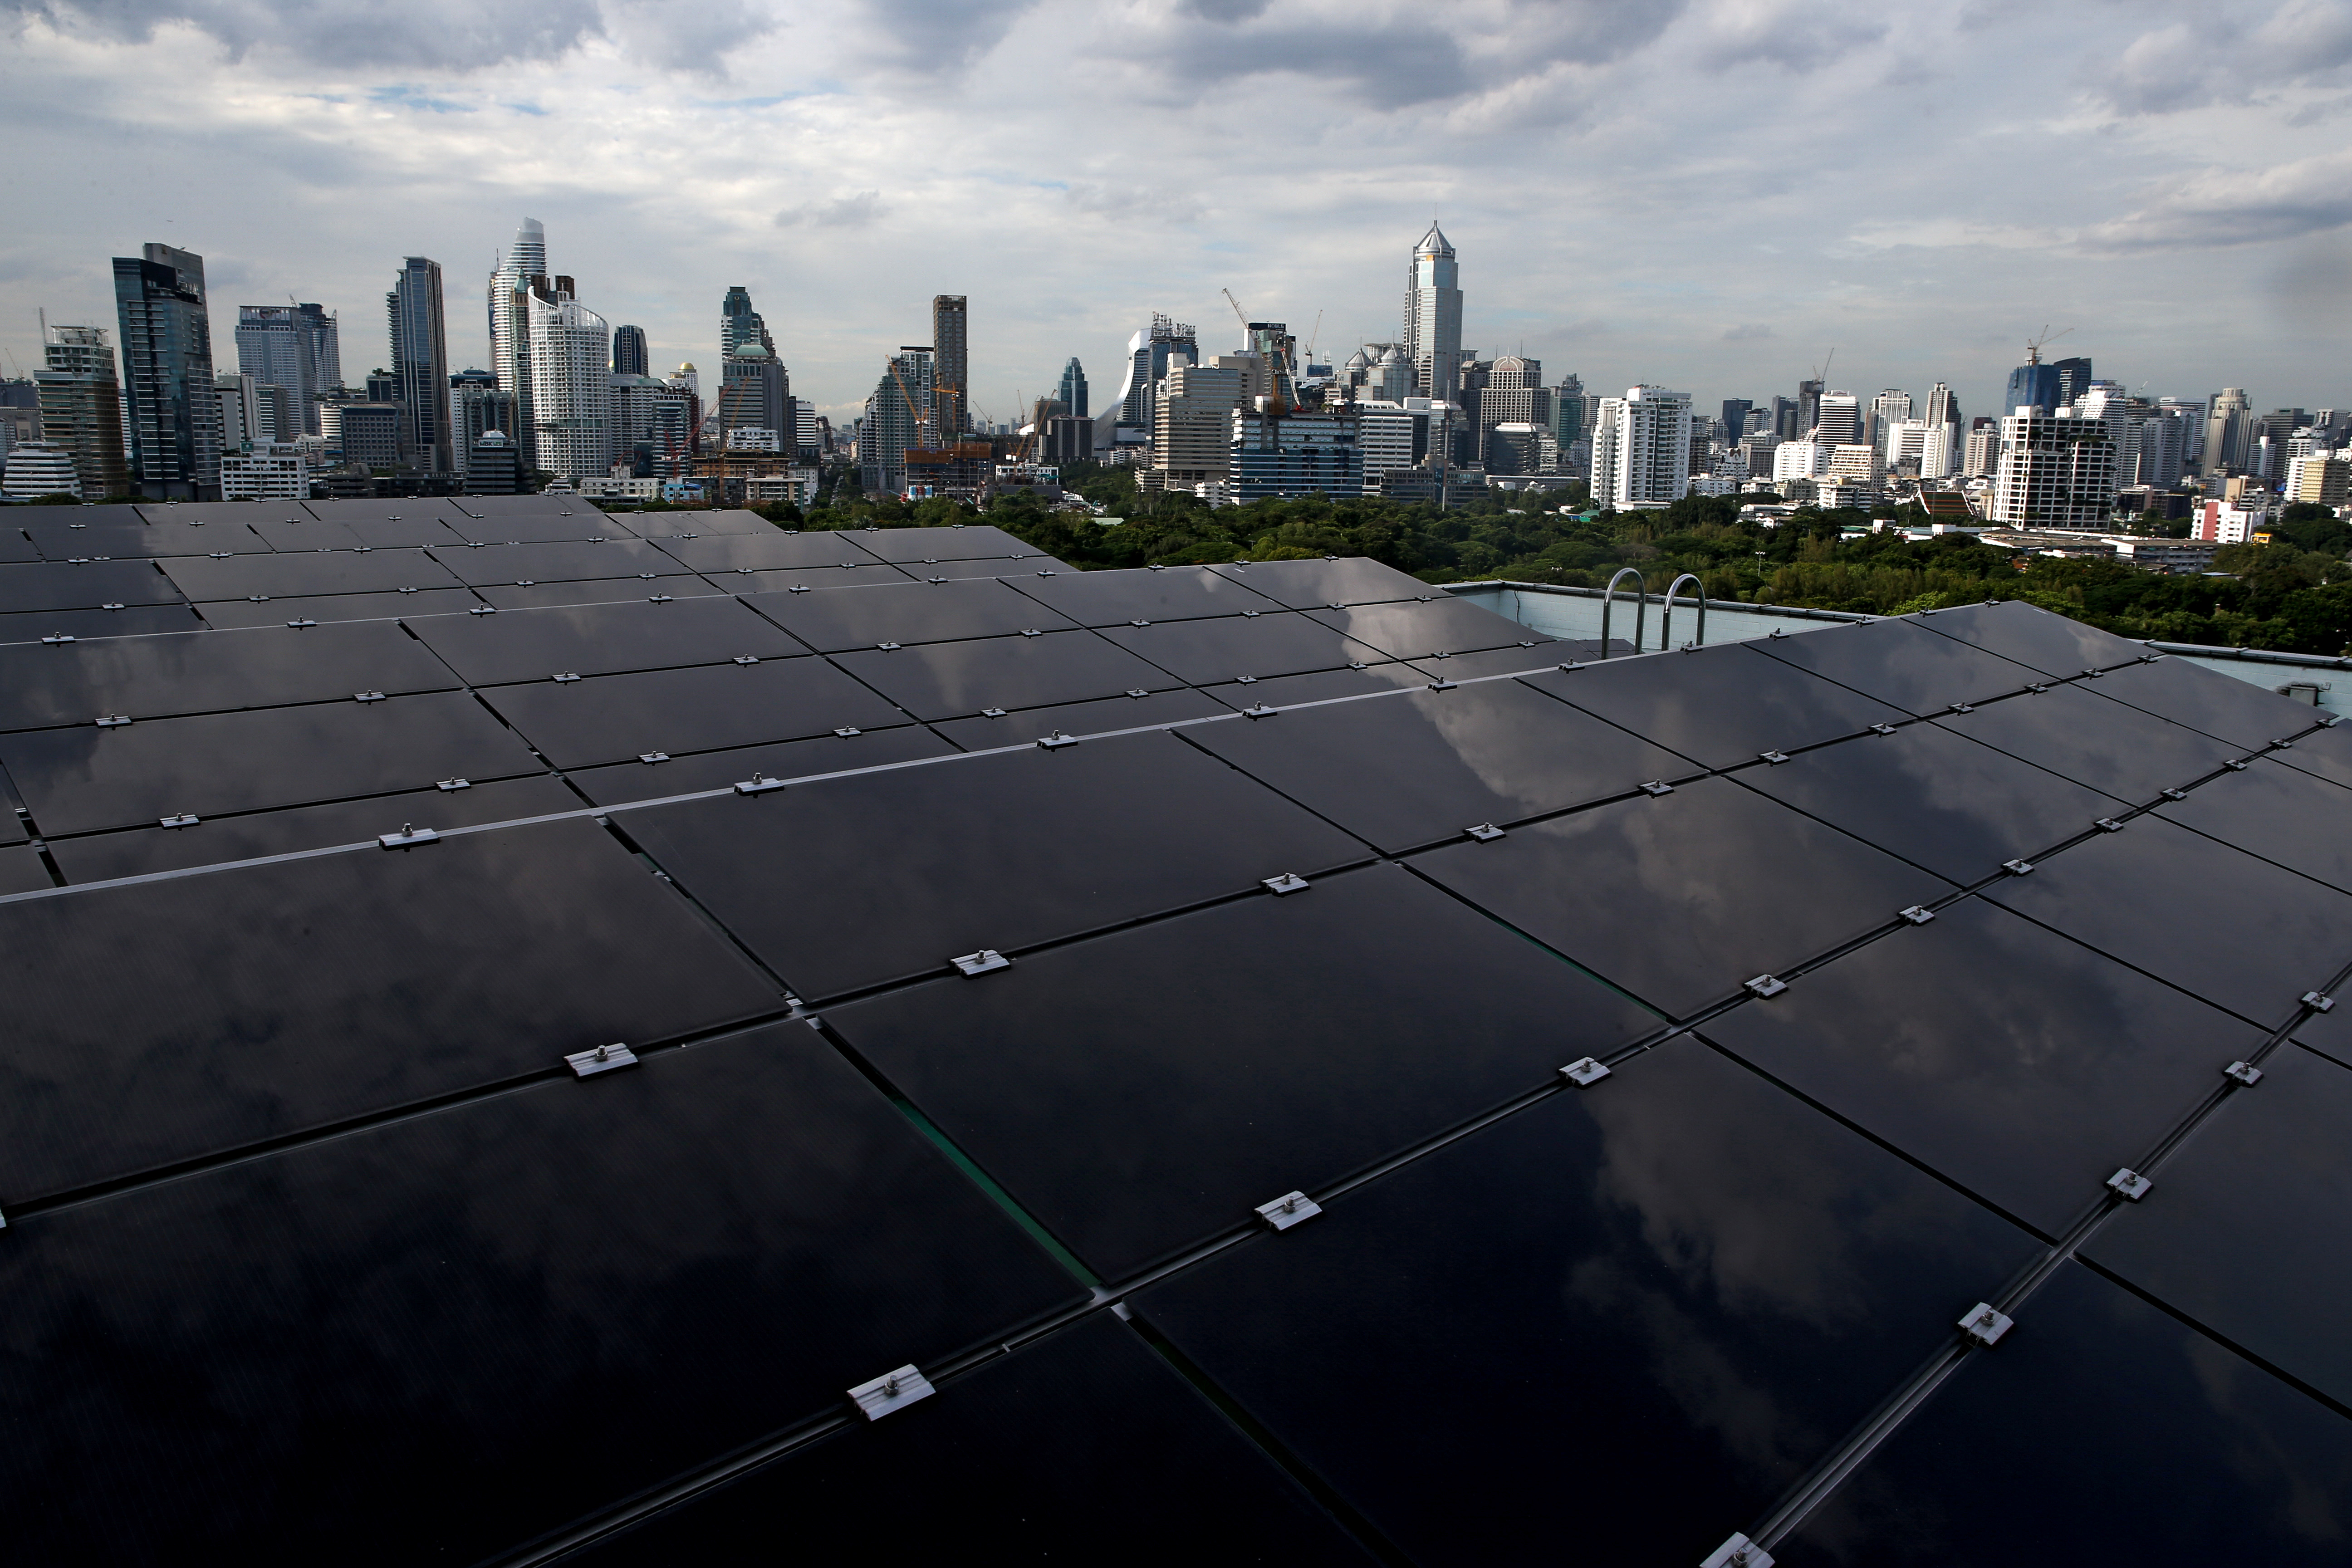 Solar panels are pictured on the roof of a building in Bangkok